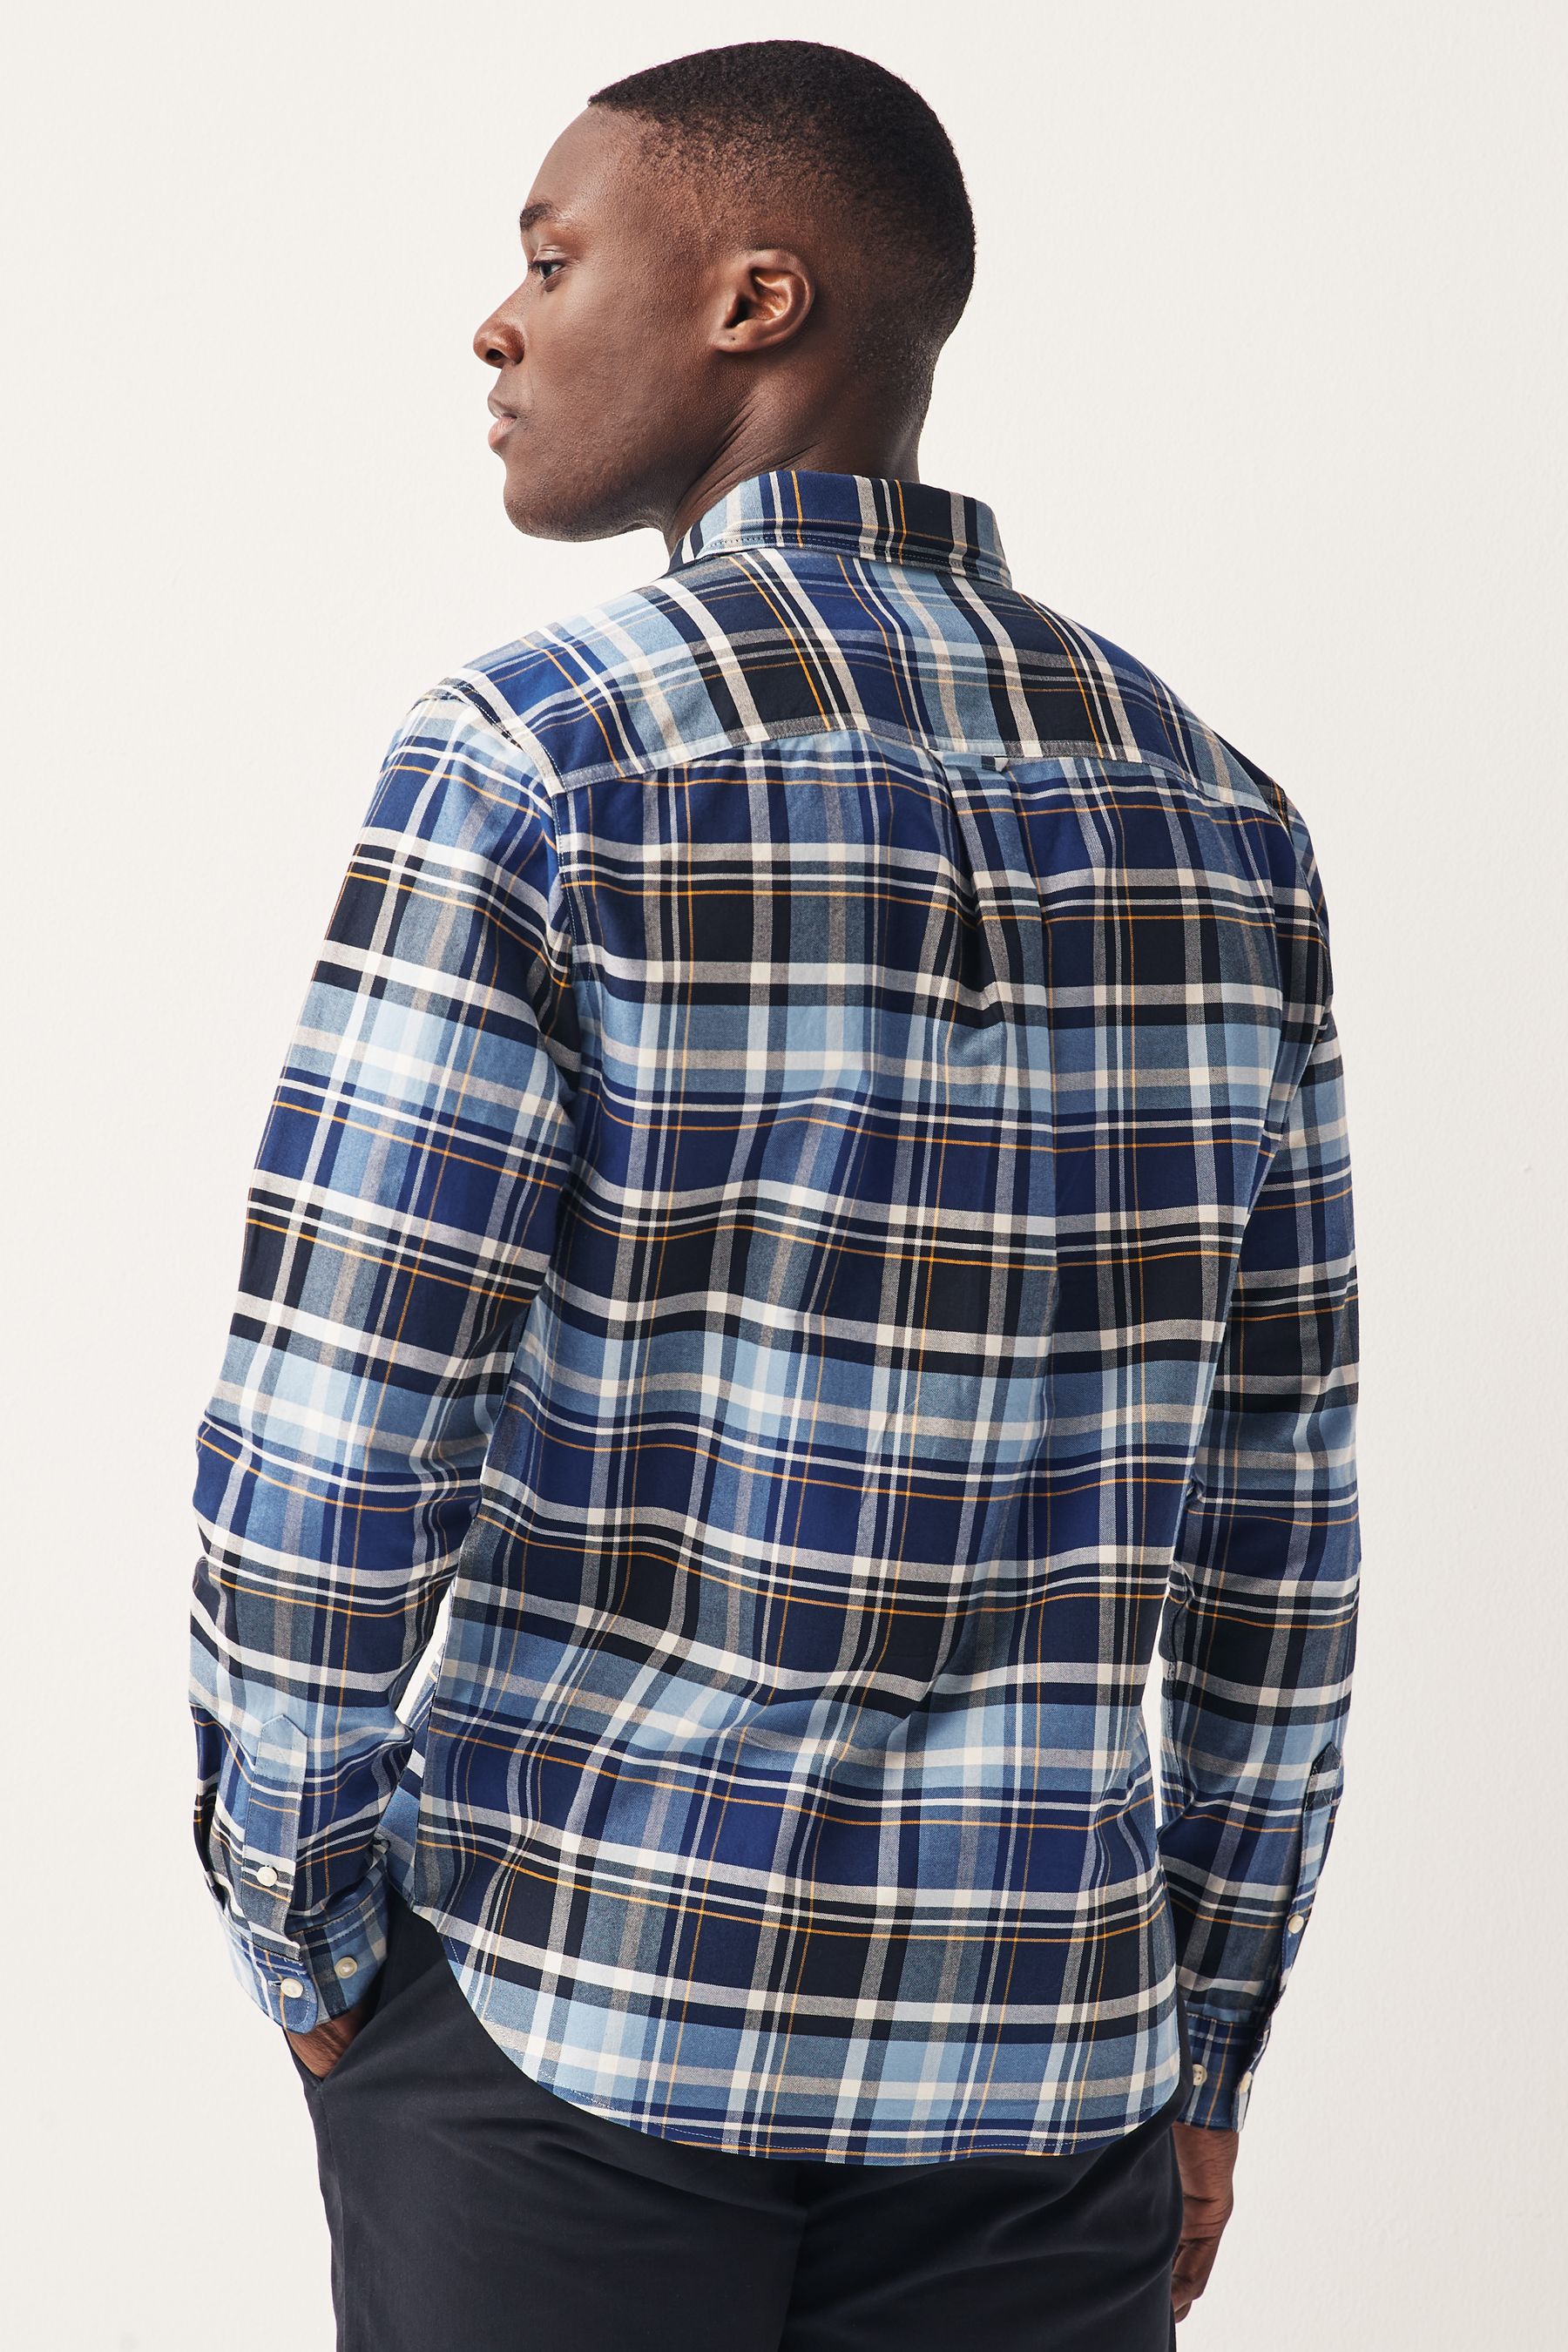 Buy Blue Check Long Sleeve Oxford Shirt from the Next UK online shop